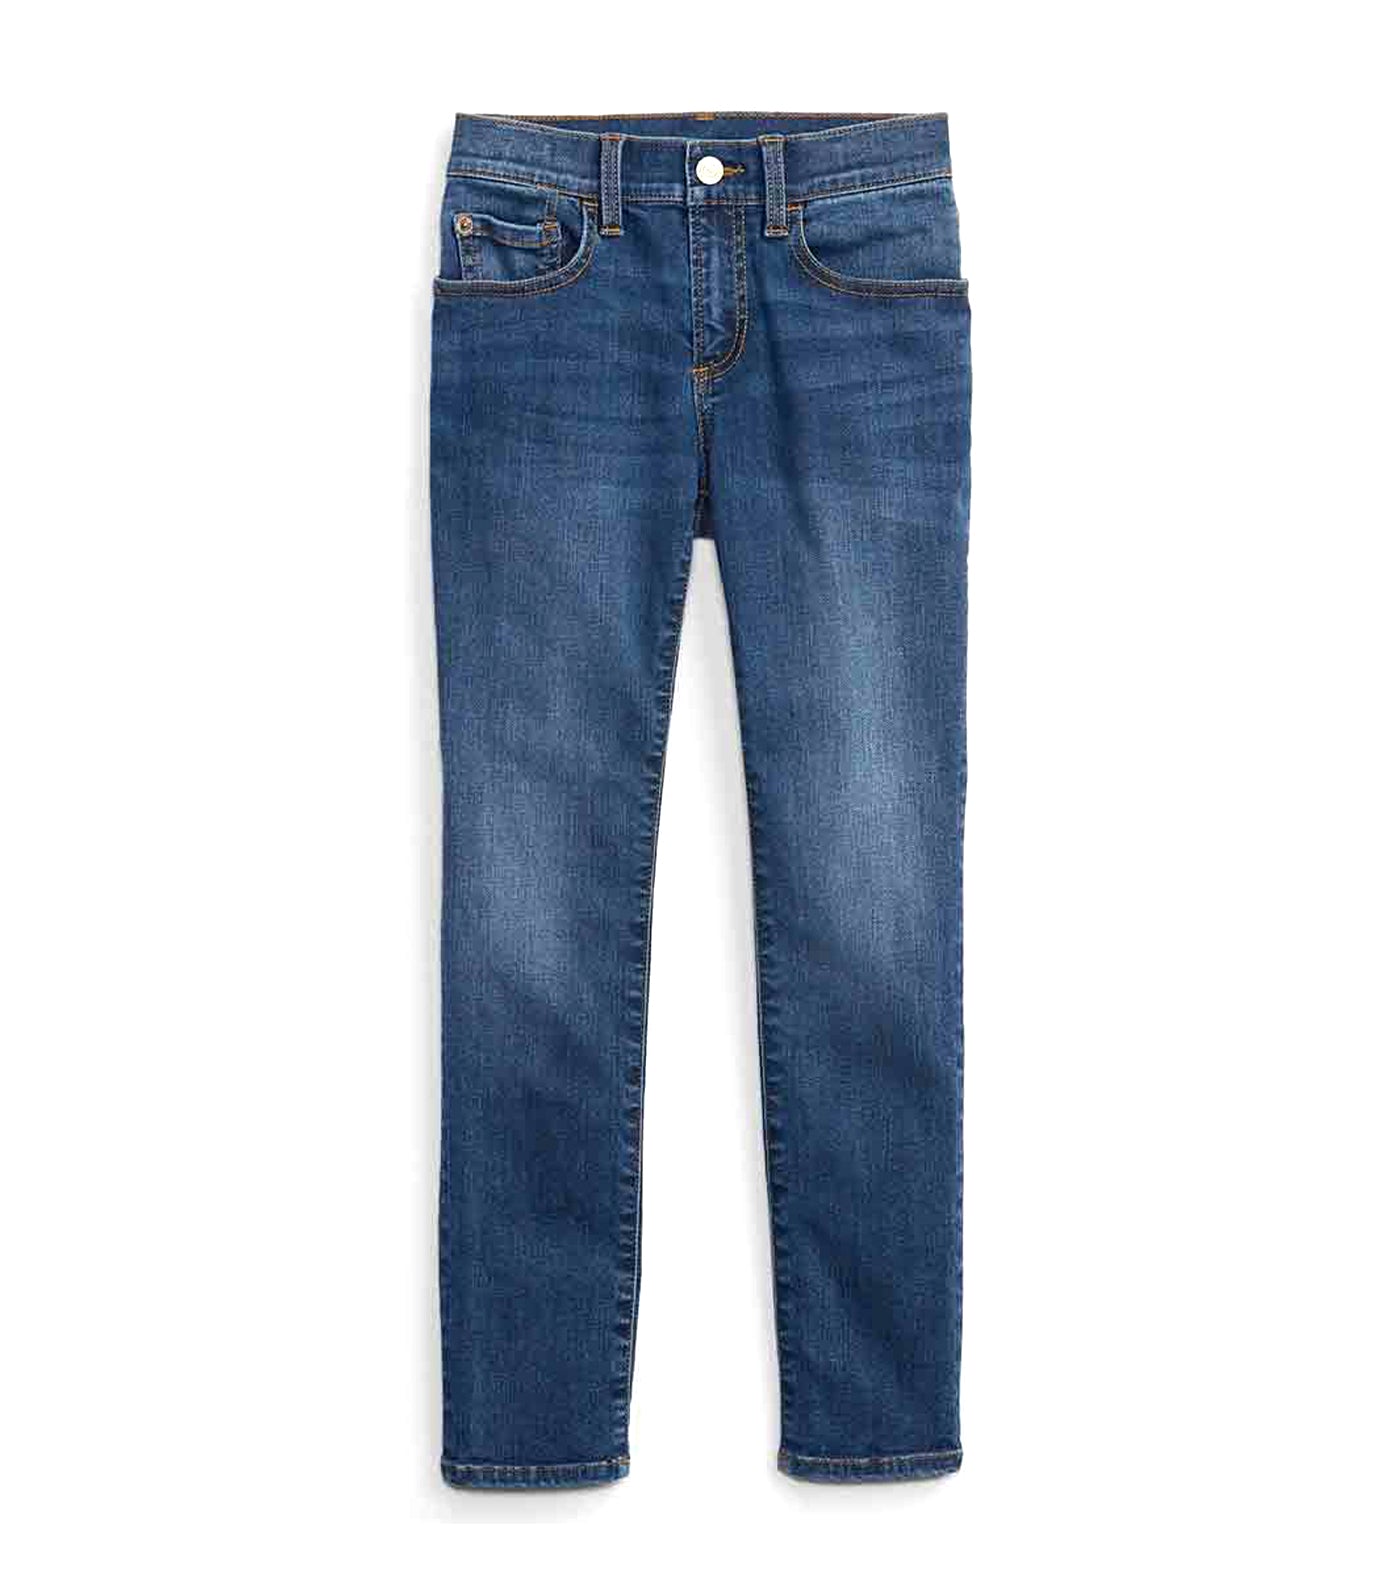 Toddler Skinny Jeans with Washwell - Medium Wash